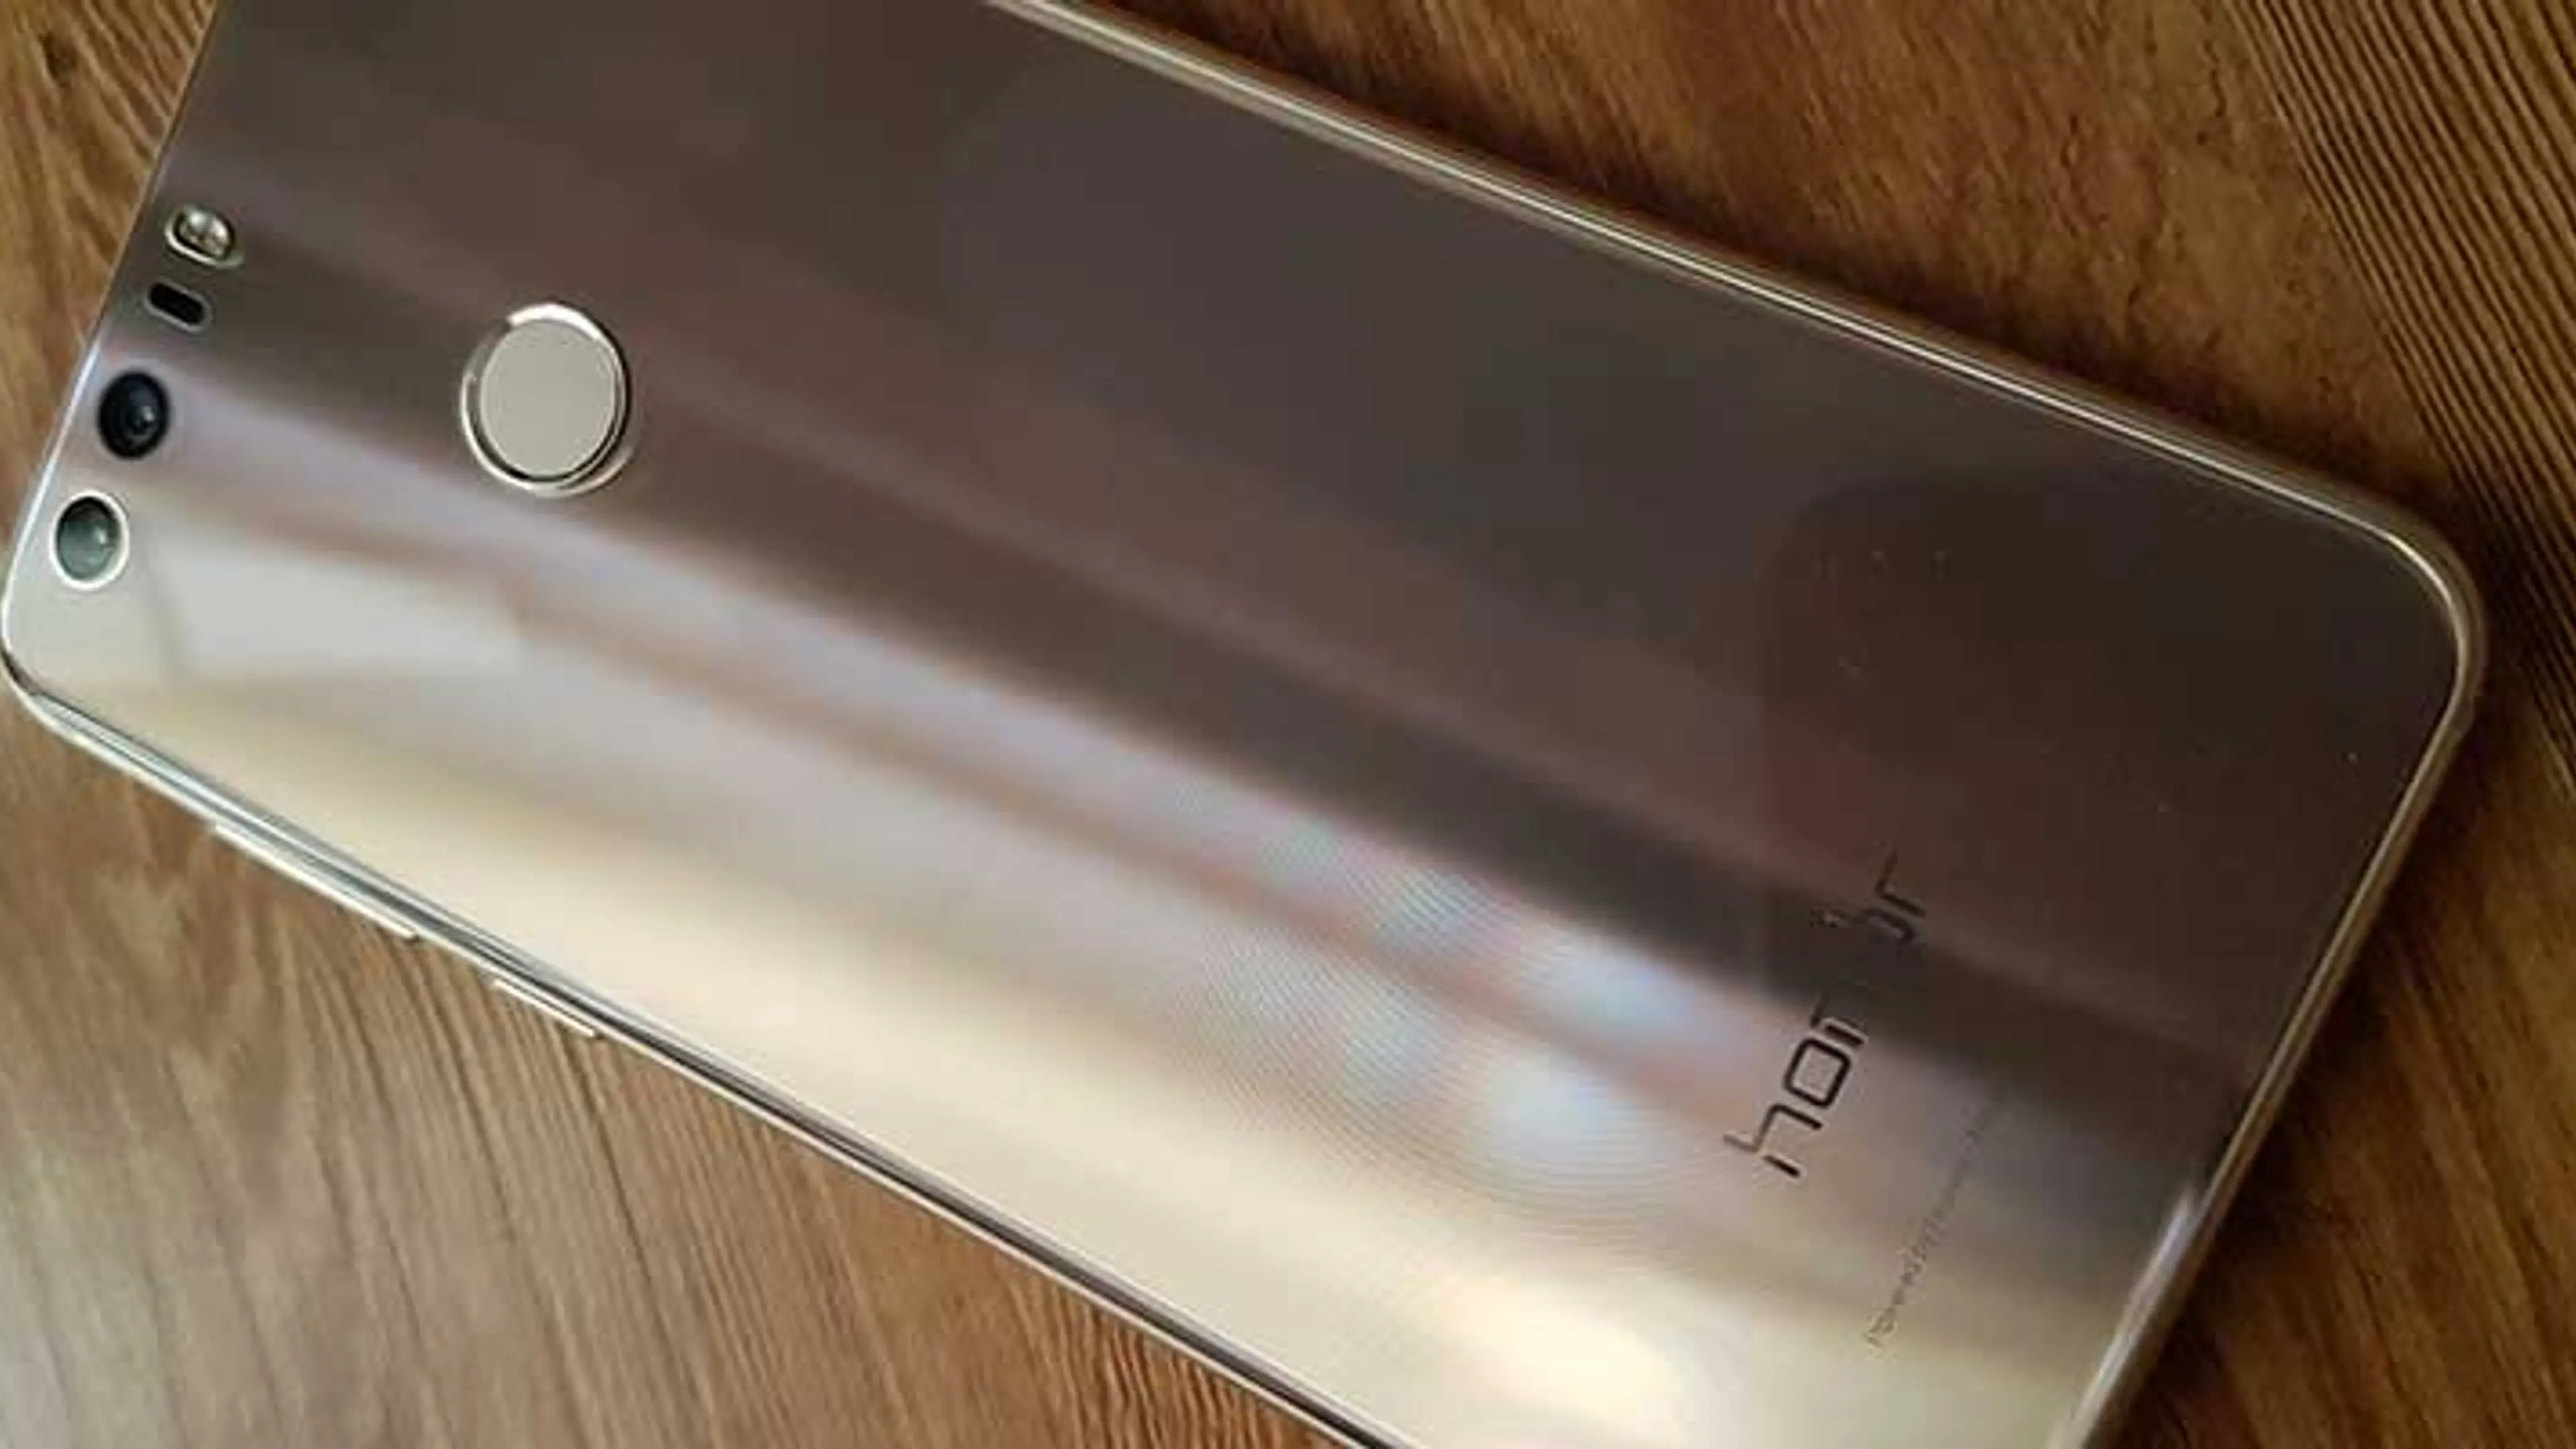 Huawei's Honor 8 phone is an absolute beauty. With its pluses and minuses